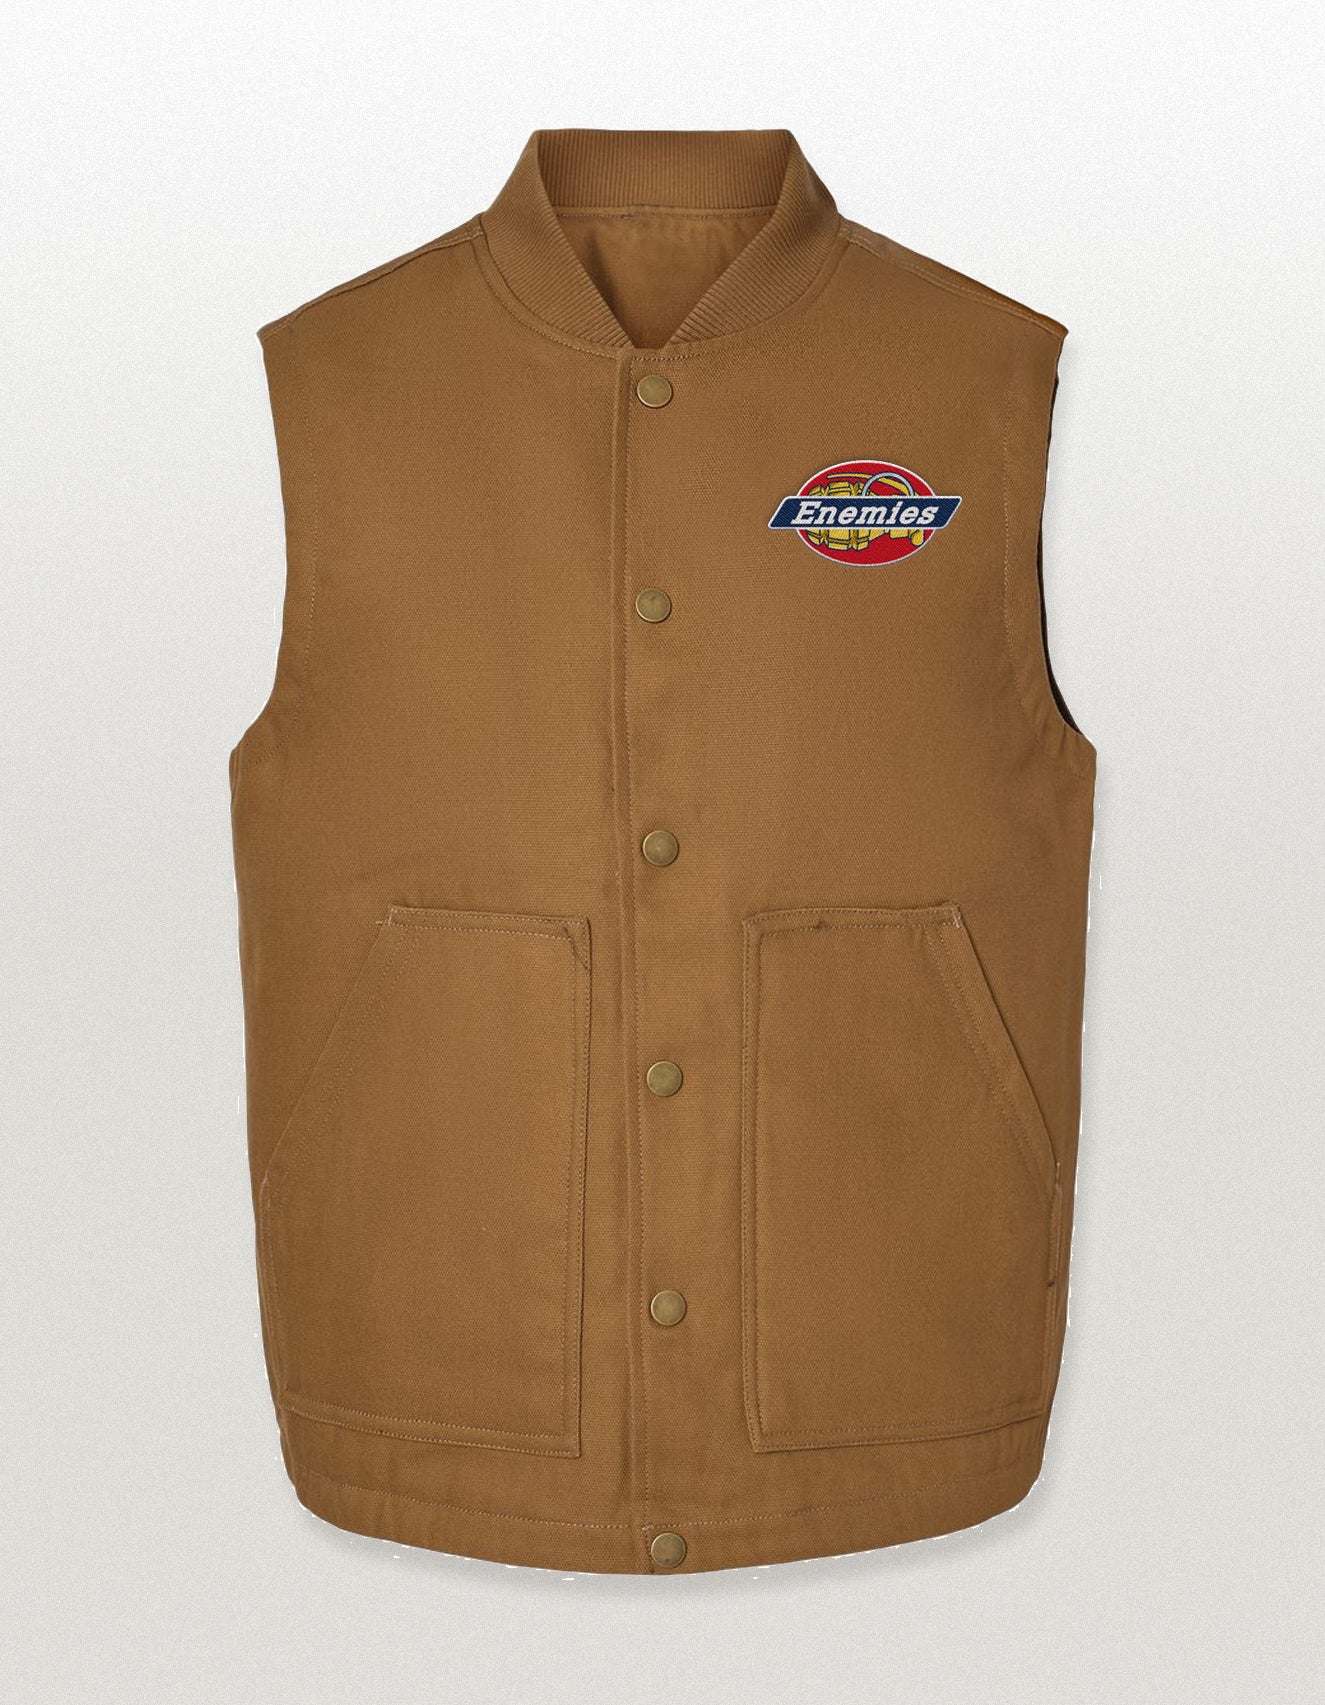 NOT A DRI FIT - Enemy Ballistics Embroidered Insulated Canvas Vest